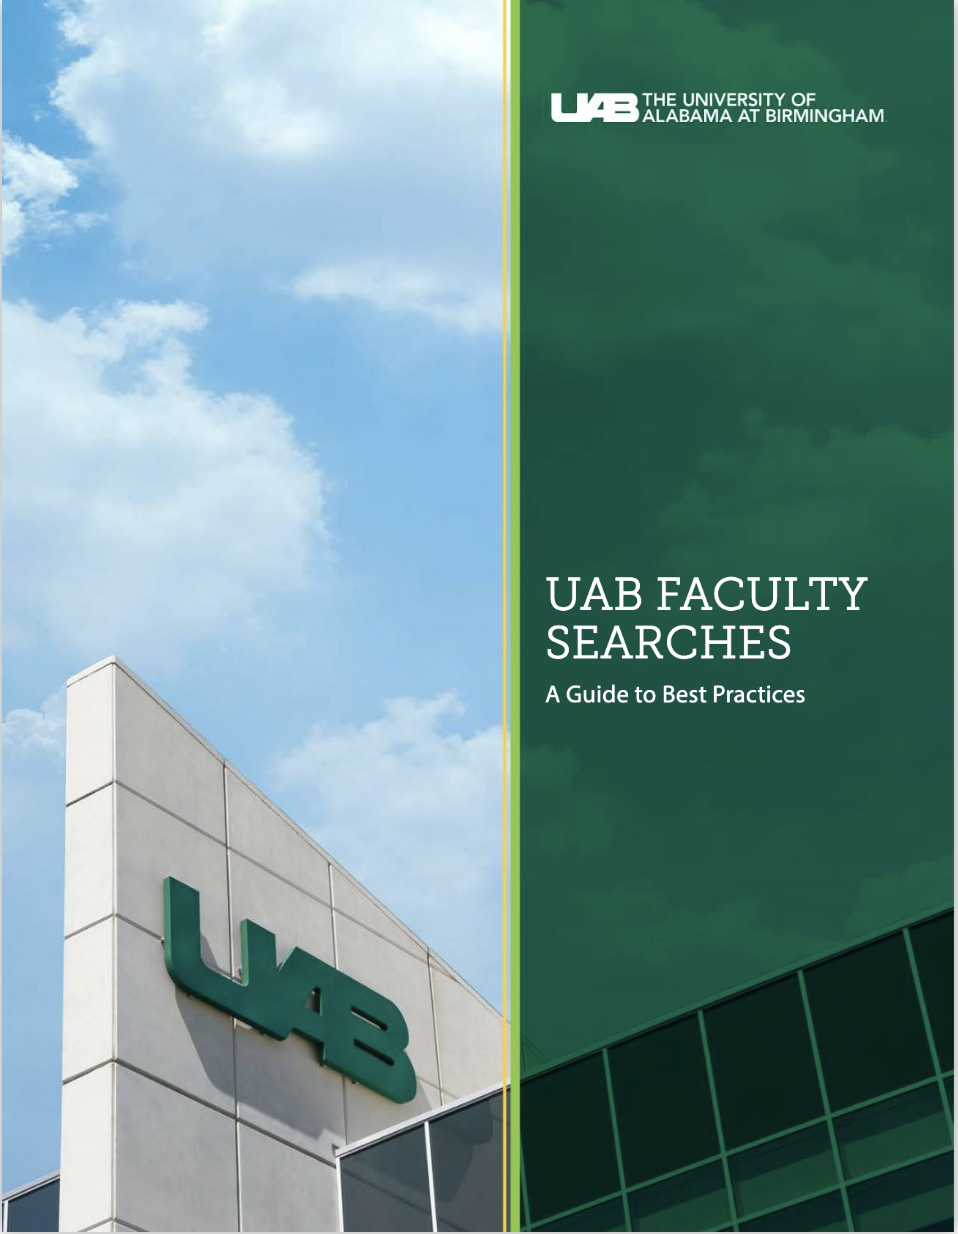 UAB Faculty Searches Guide